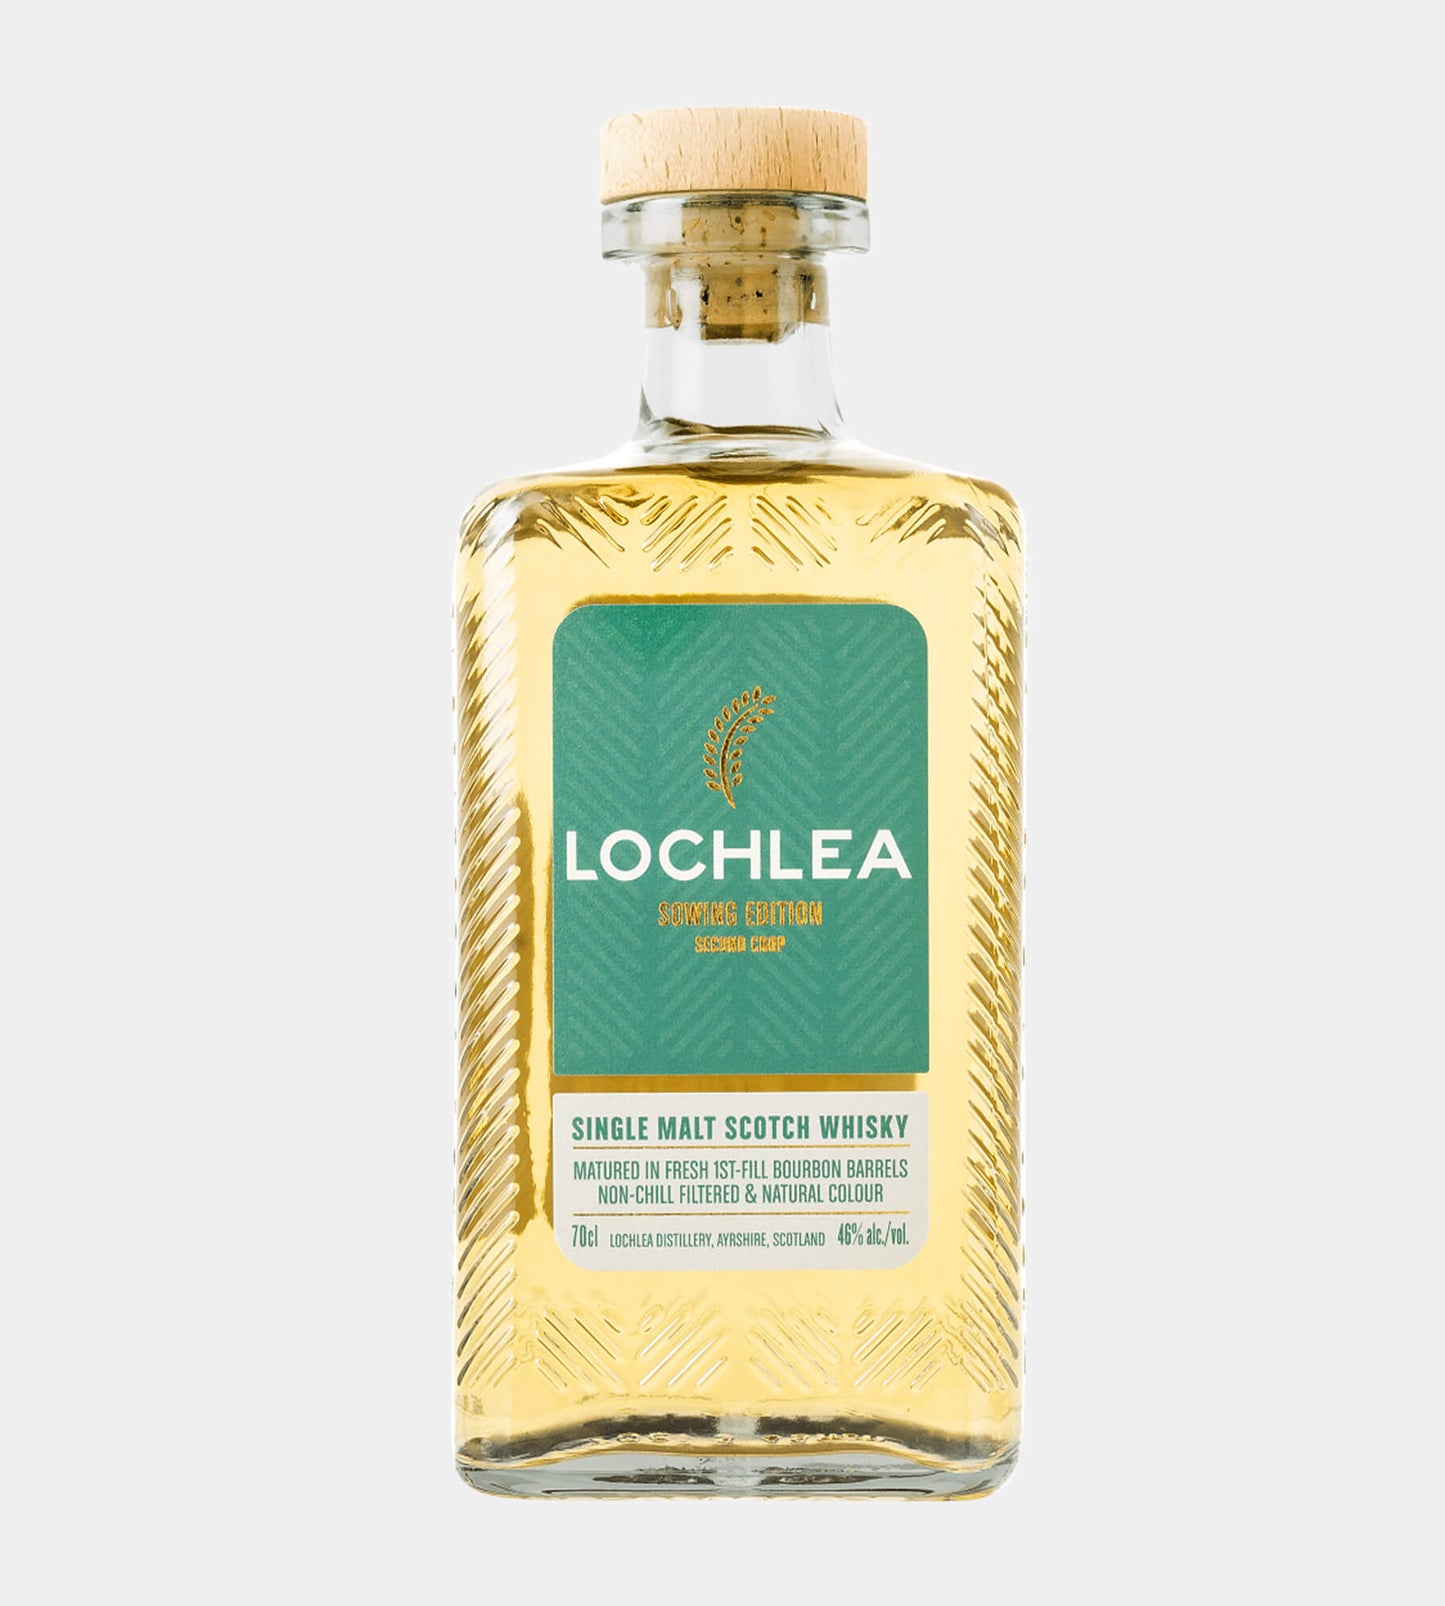 Lochlea Single Malt Scotch Whisky • Sowing Edition 2nd Crop